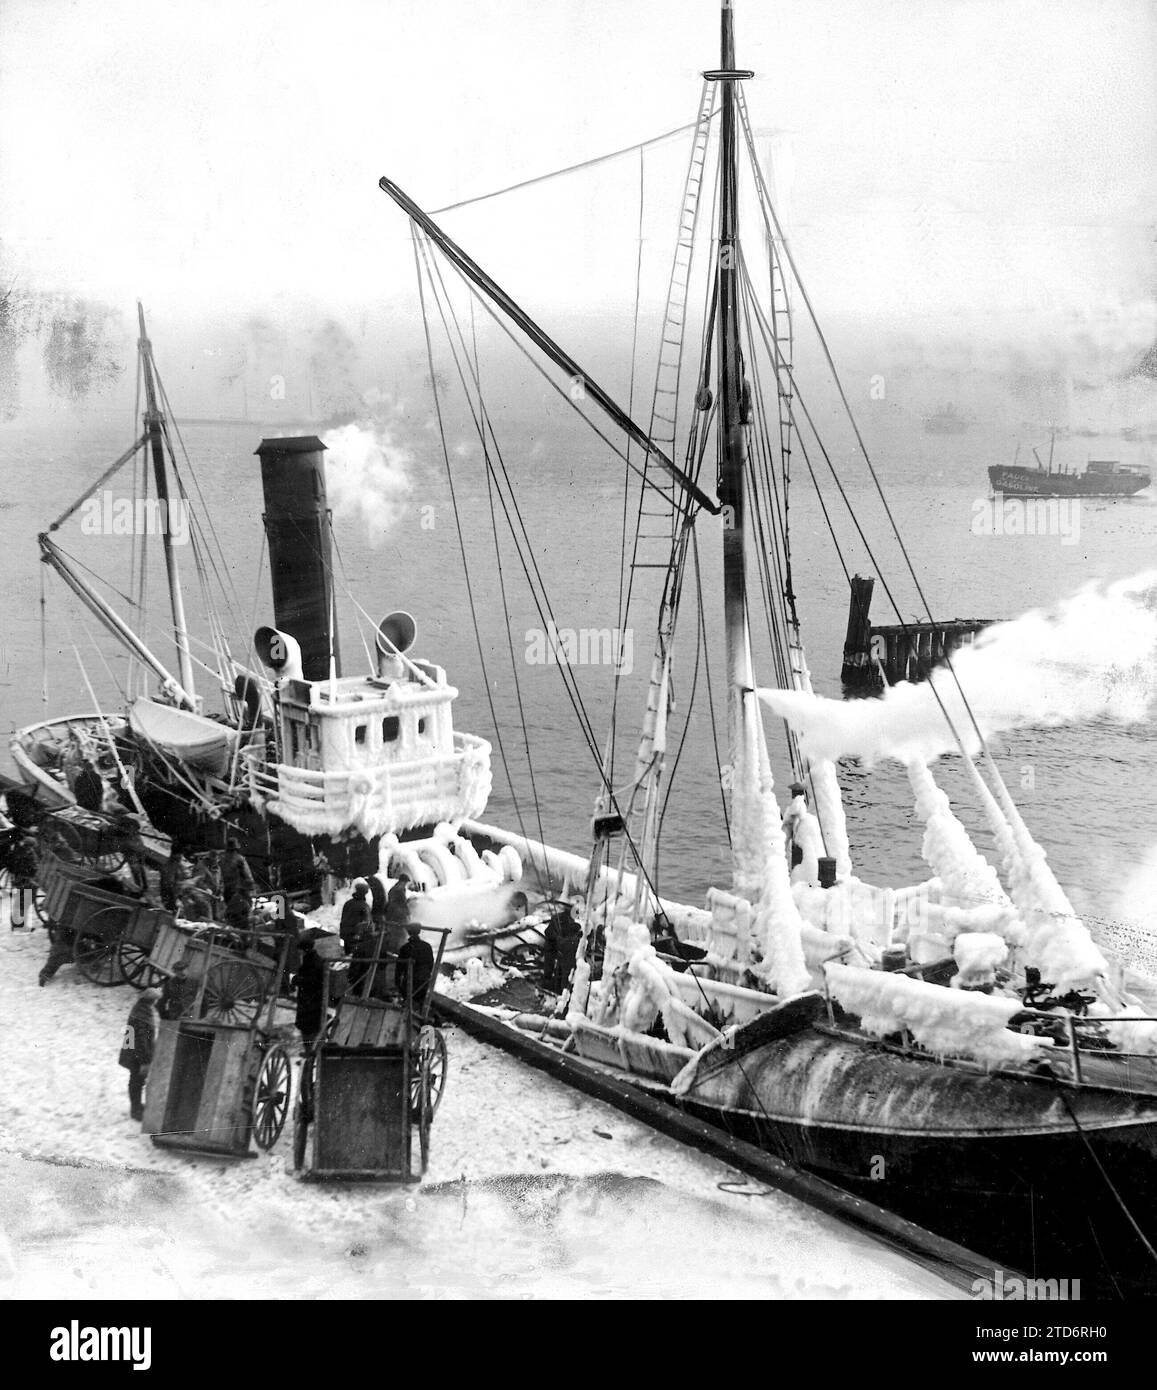 12/31/1925. The Rigors of this winter in the United States. Temperatures as low as those of these days are not remembered in the whole world, in Boston the Spectacle that reproduces this Photograph of the Fishing Vessel 'Swell' covered in Ice is frequent. Photomontage: the photo is Positive on another previous photograph. Credit: Album / Archivo ABC / Vidal Stock Photo